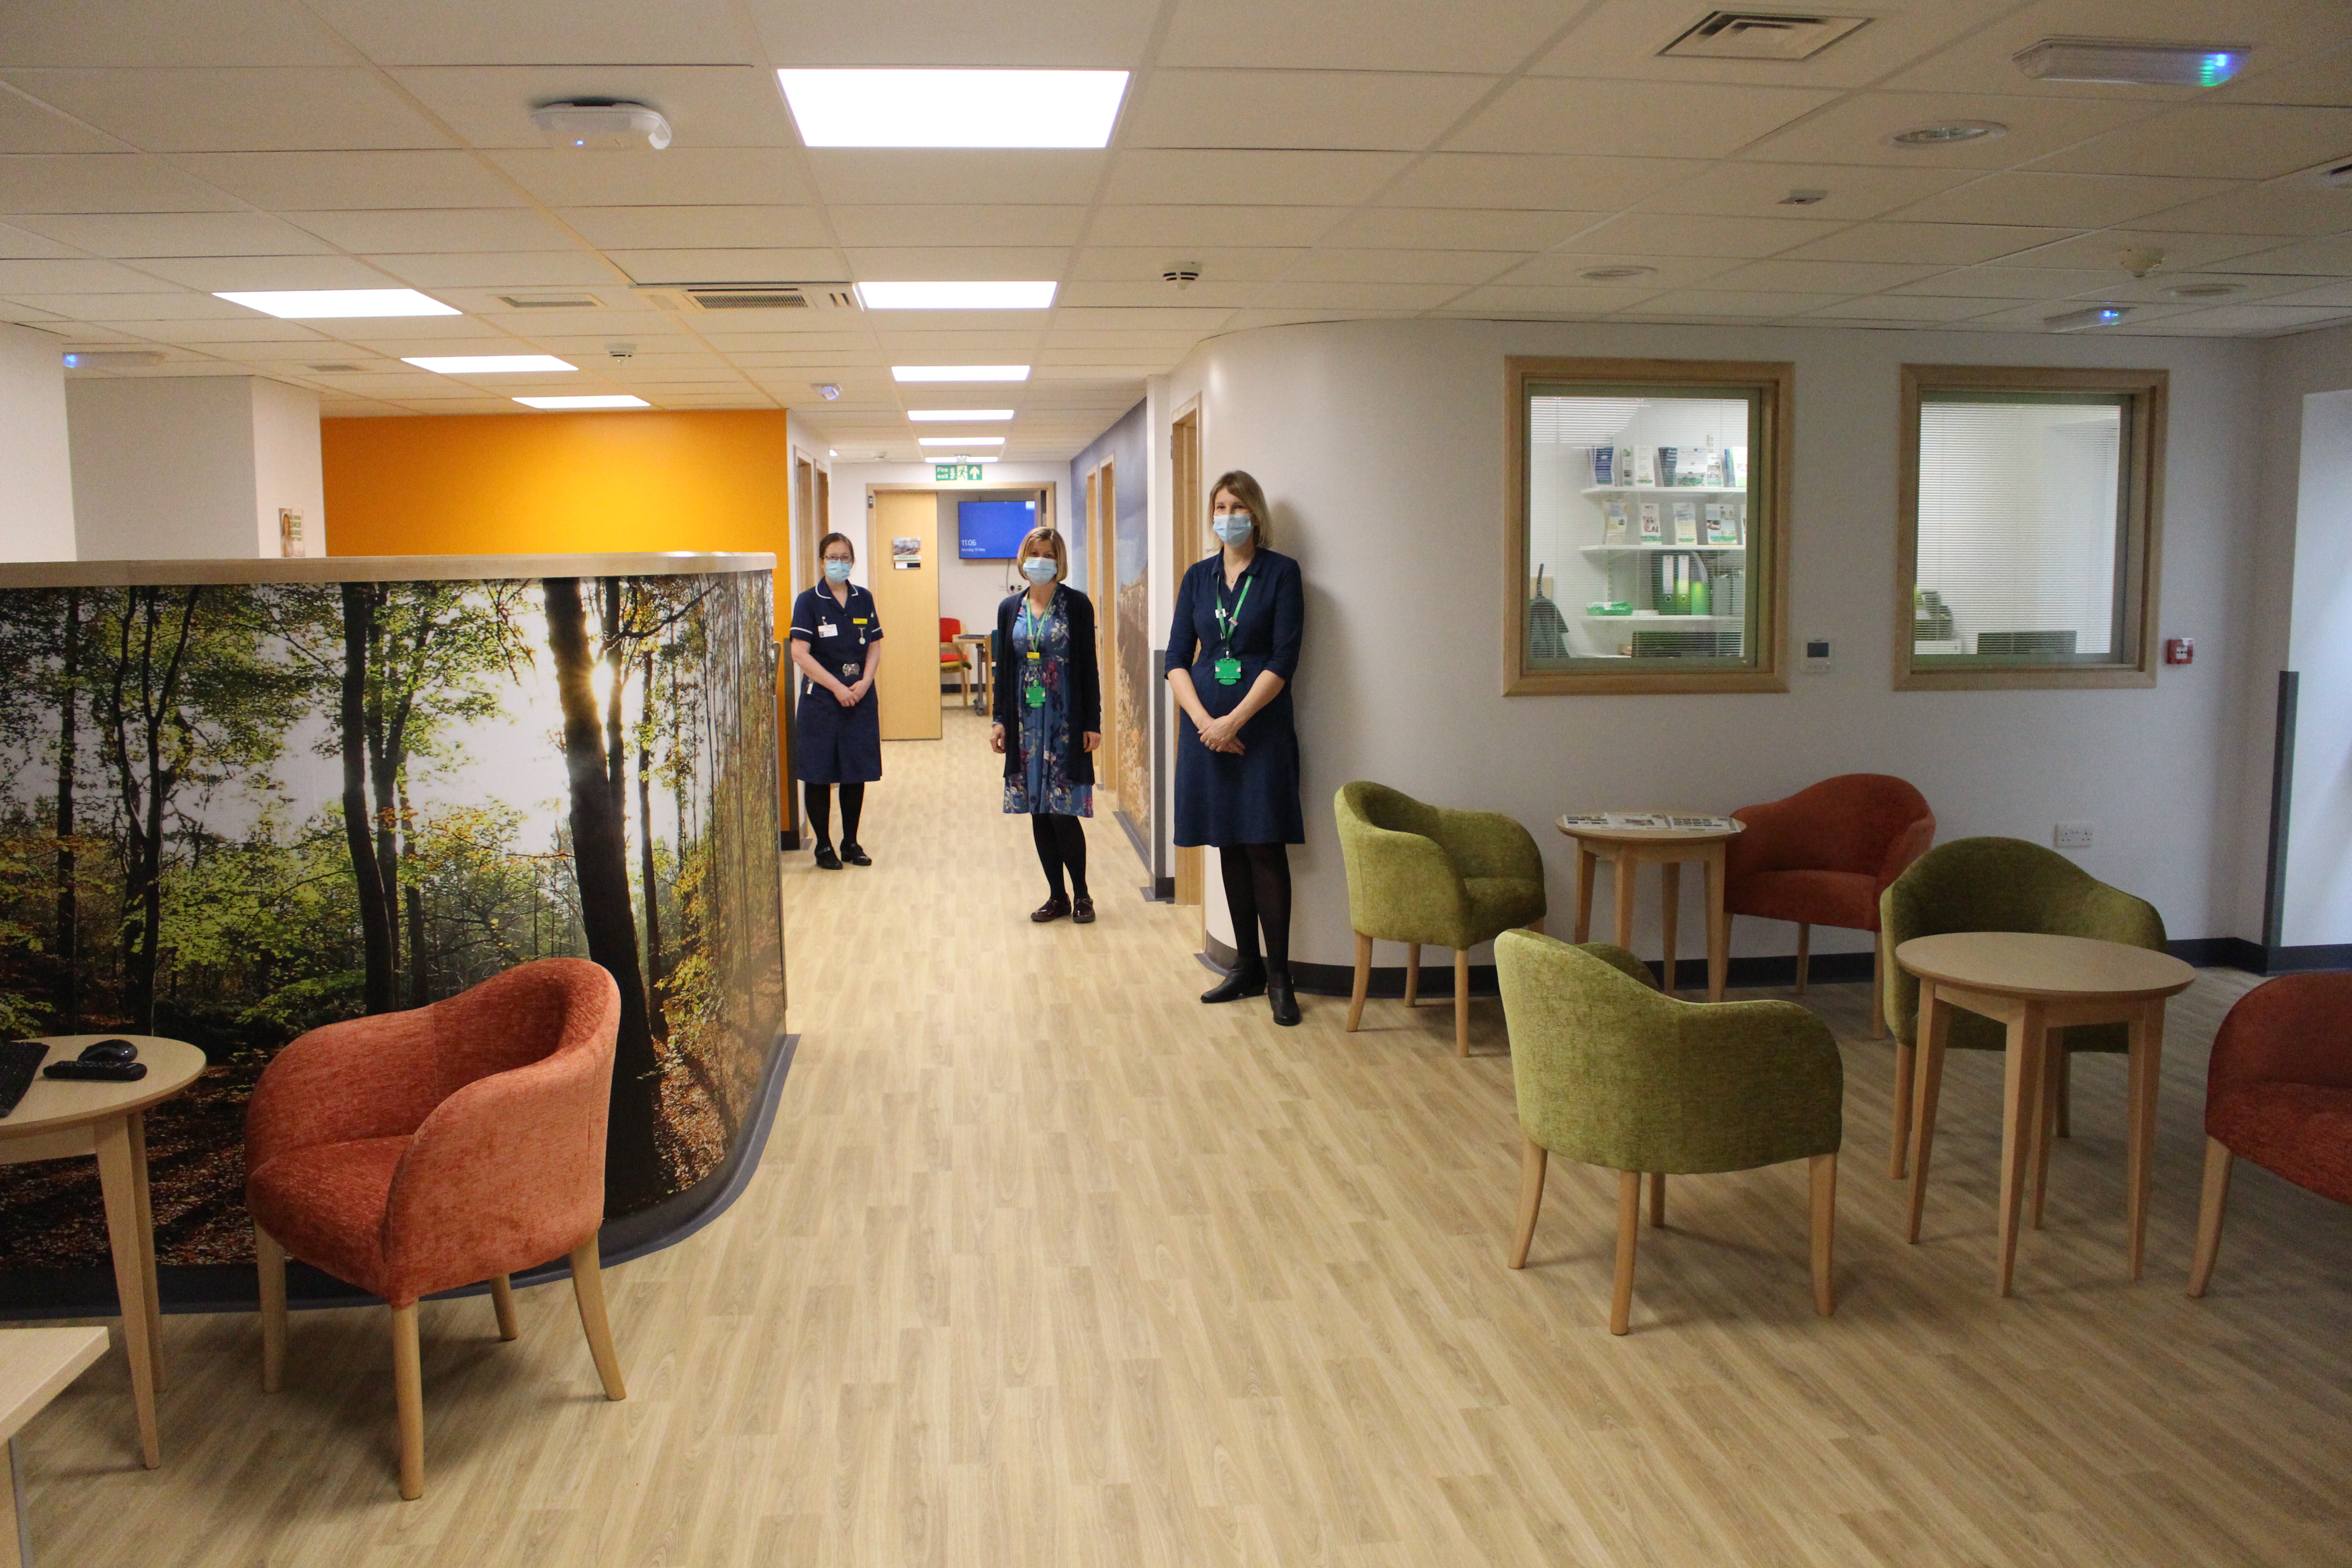 Cancer wellbeing and support centre